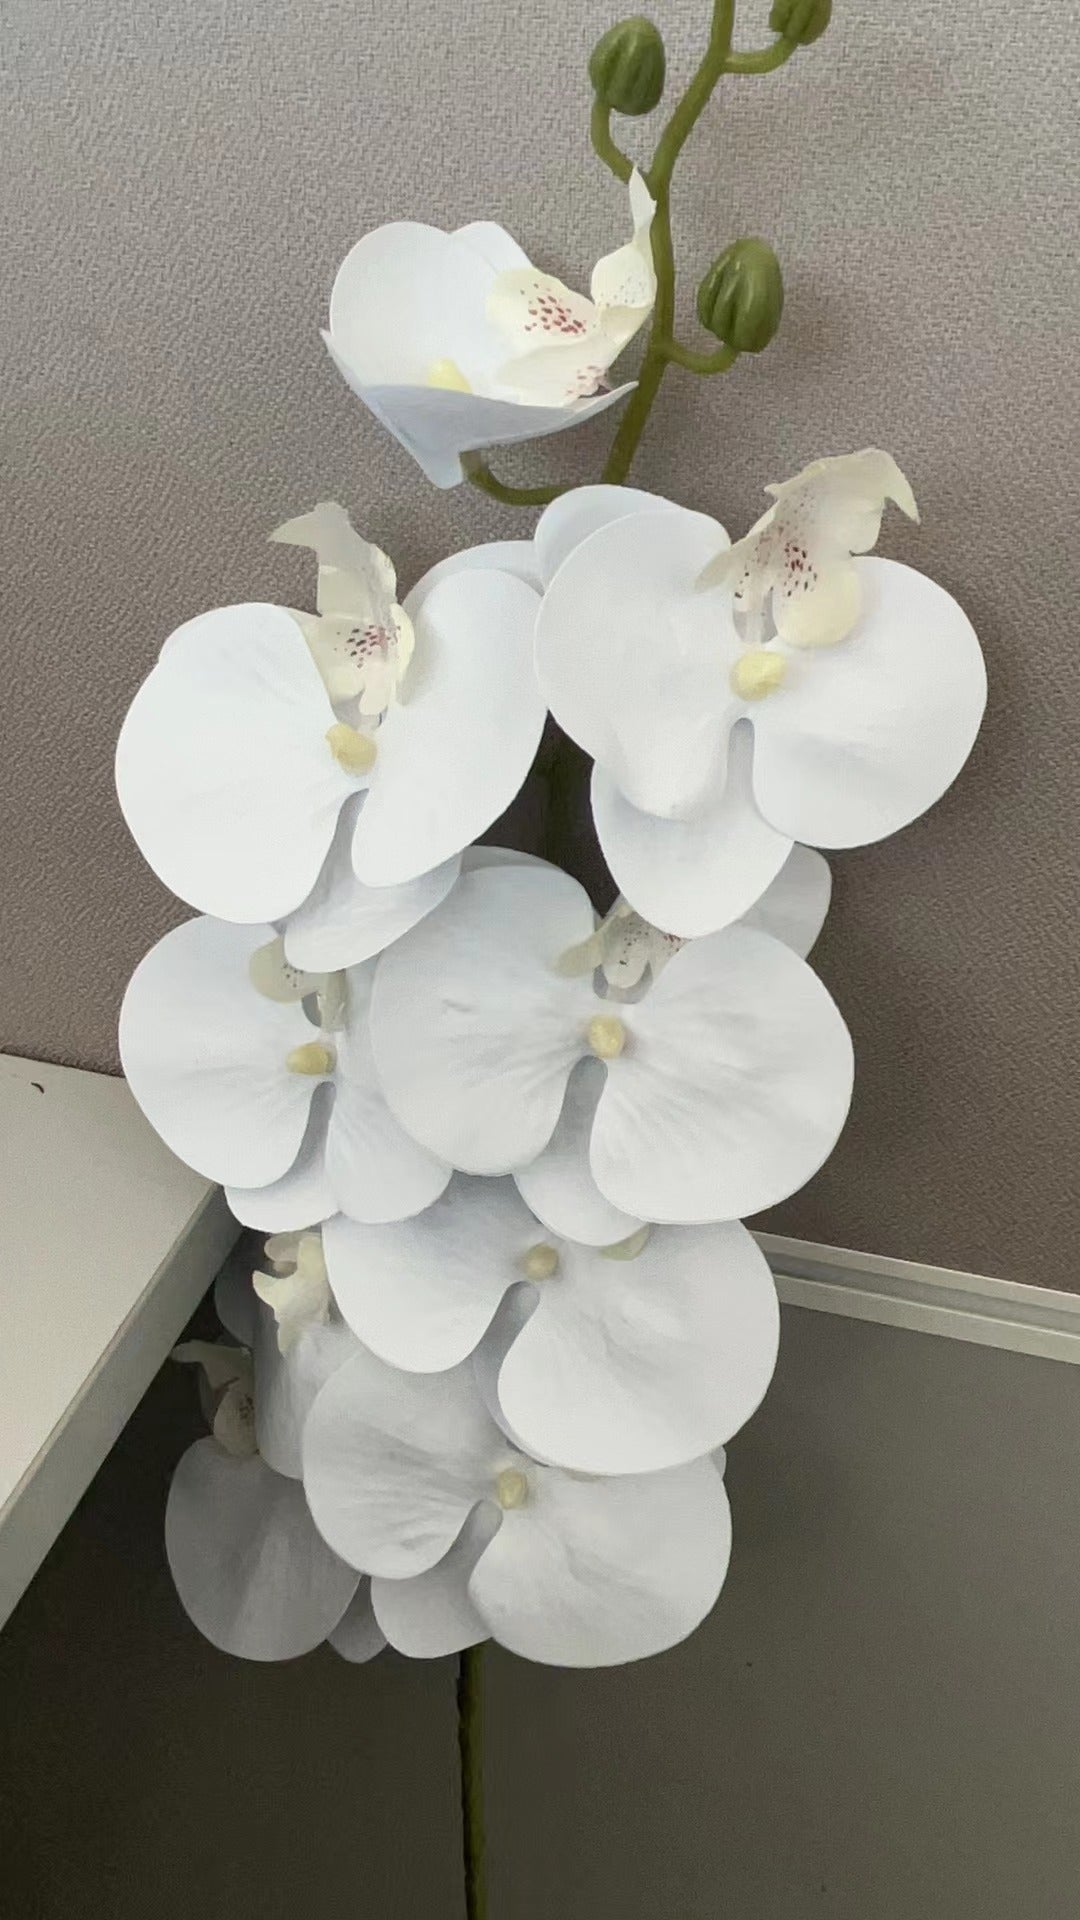 Orchid Stems Artificial Flowers Real Touch Latex Faux Phalaenopsis Branches 9 Large Blooms 38 Inches 2pcs White